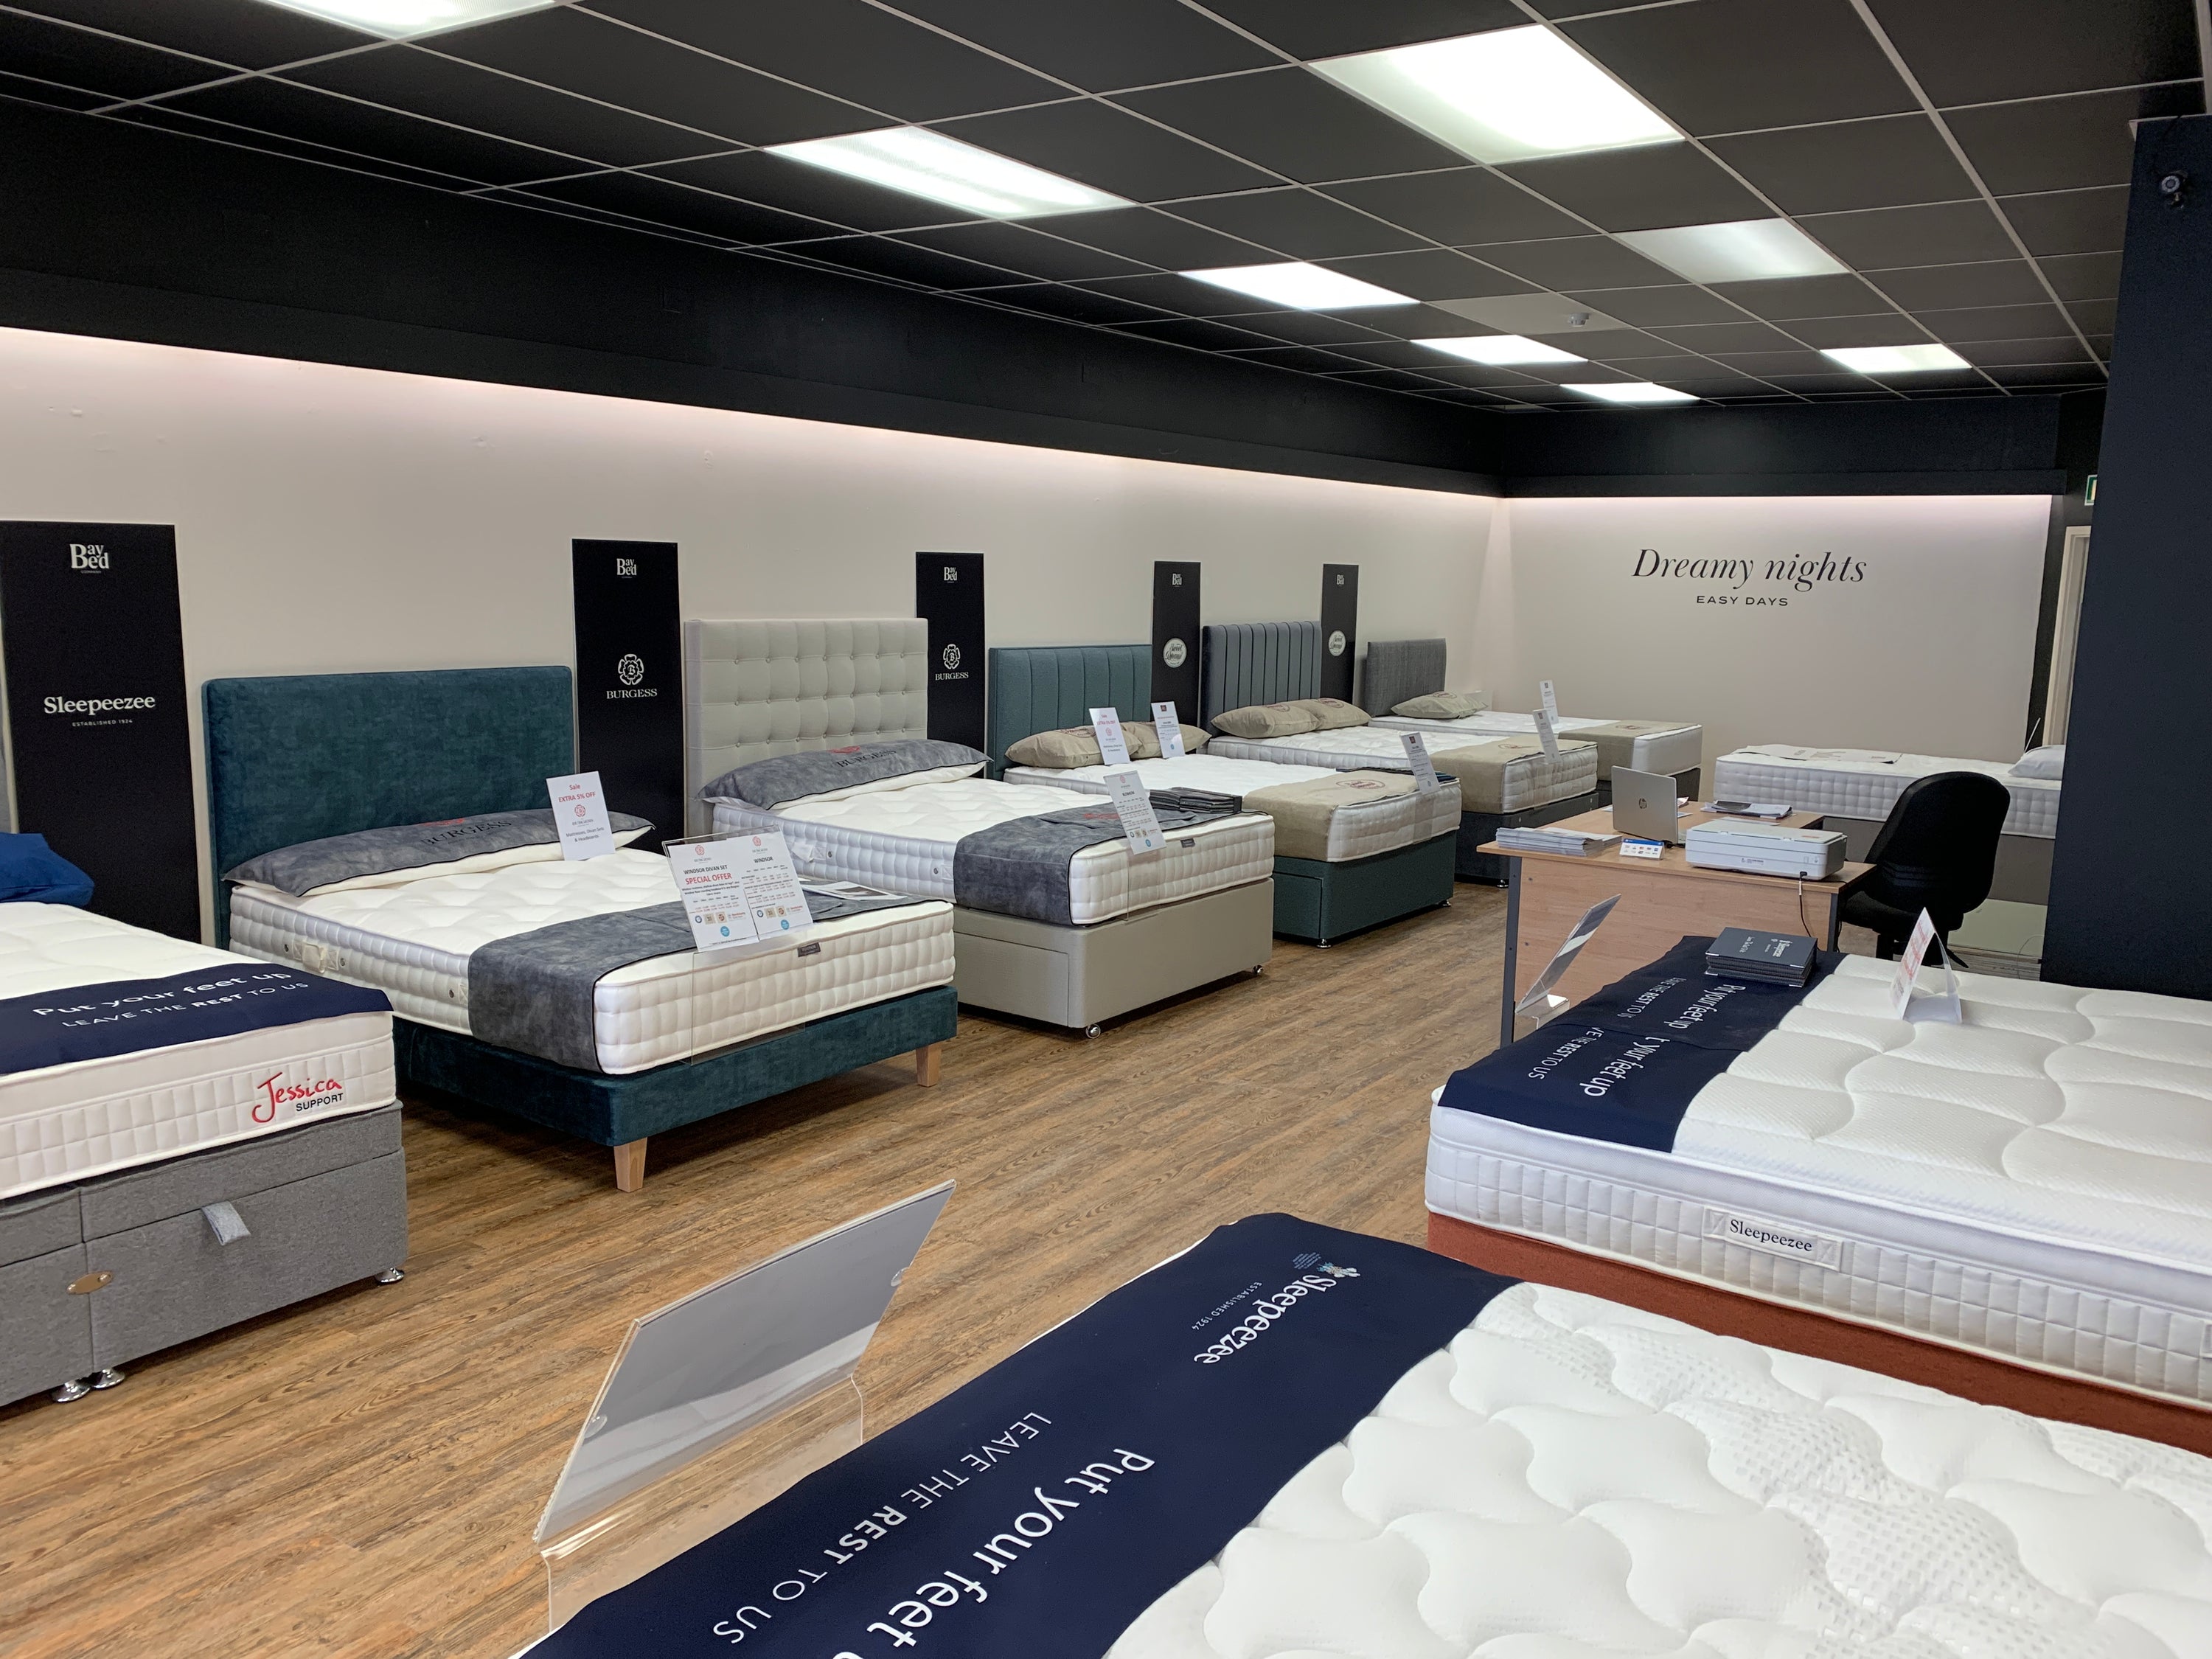 Lancaster Beds and mattresses